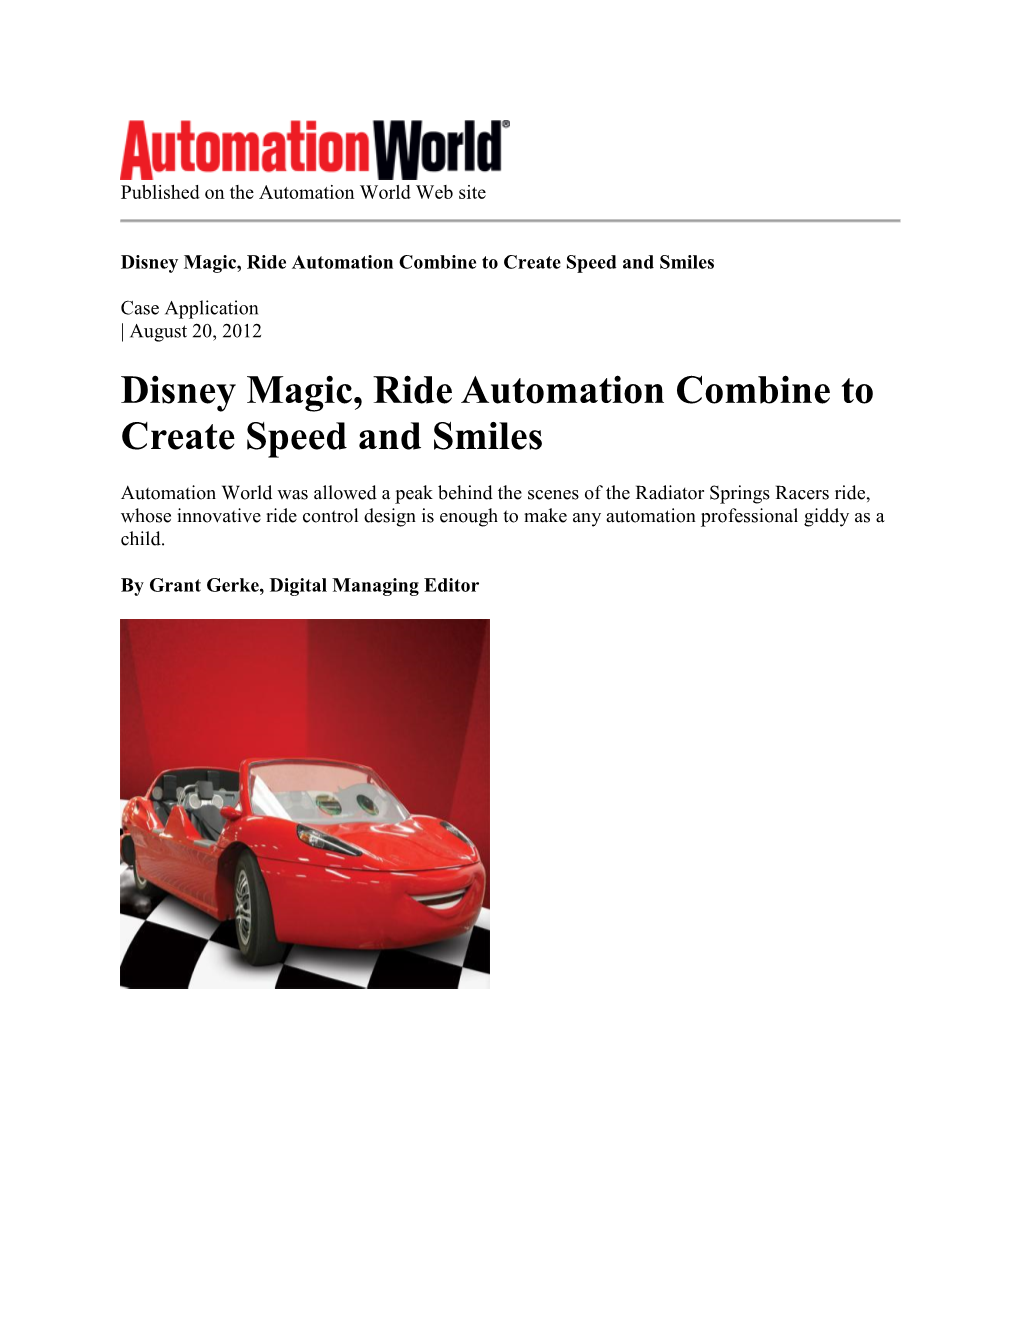 Disney Magic, Ride Automation Combine to Create Speed and Smiles